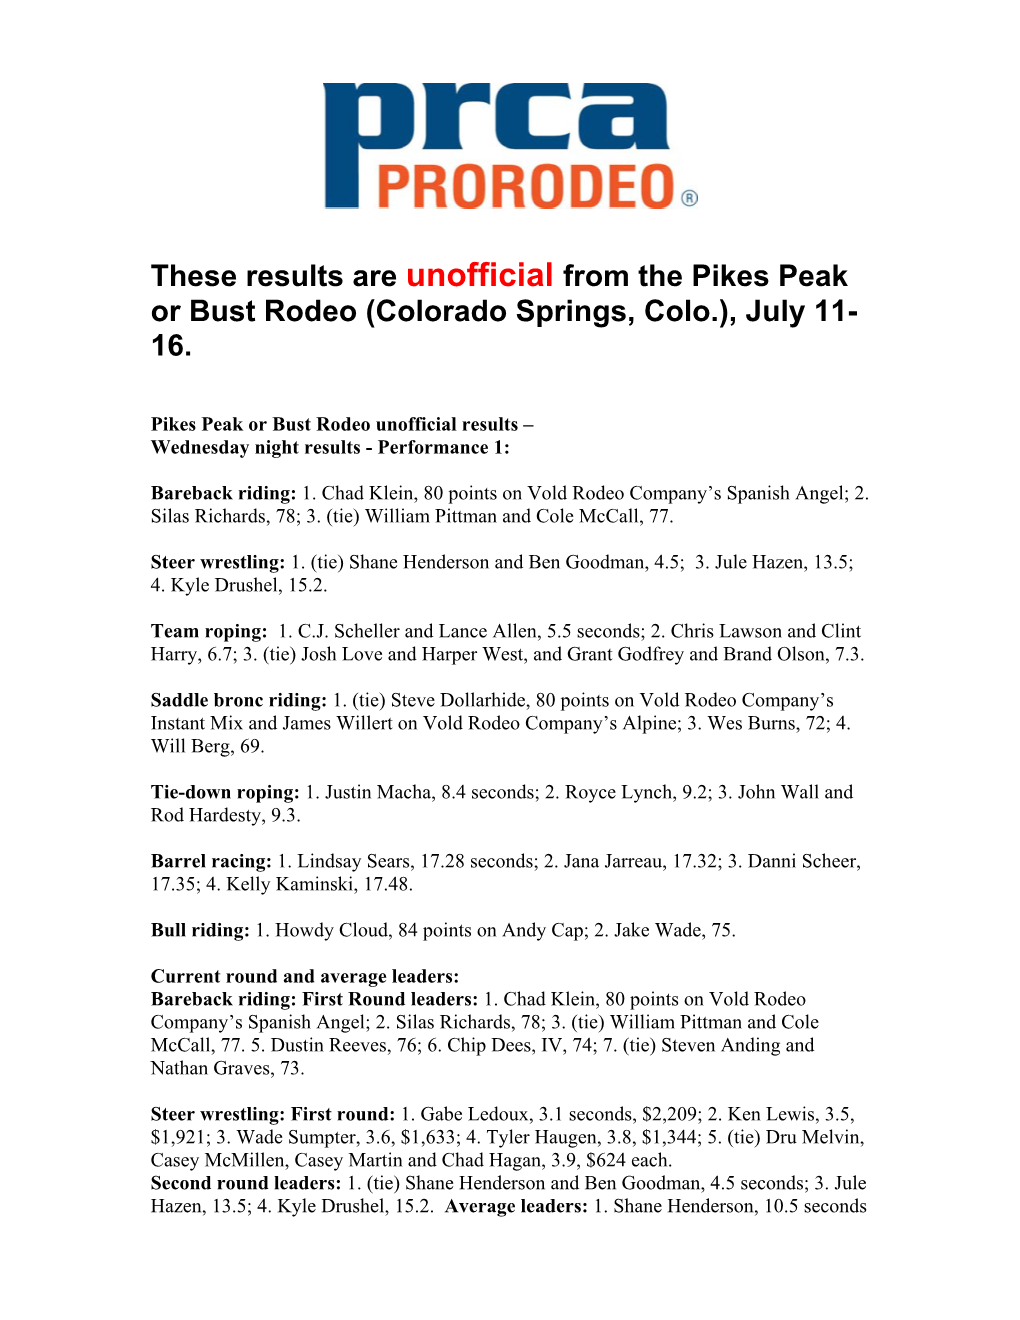 These Results Are Unofficial from the Pikes Peak Or Bust Rodeo (Colorado Springs, Colo.), July 11- 16